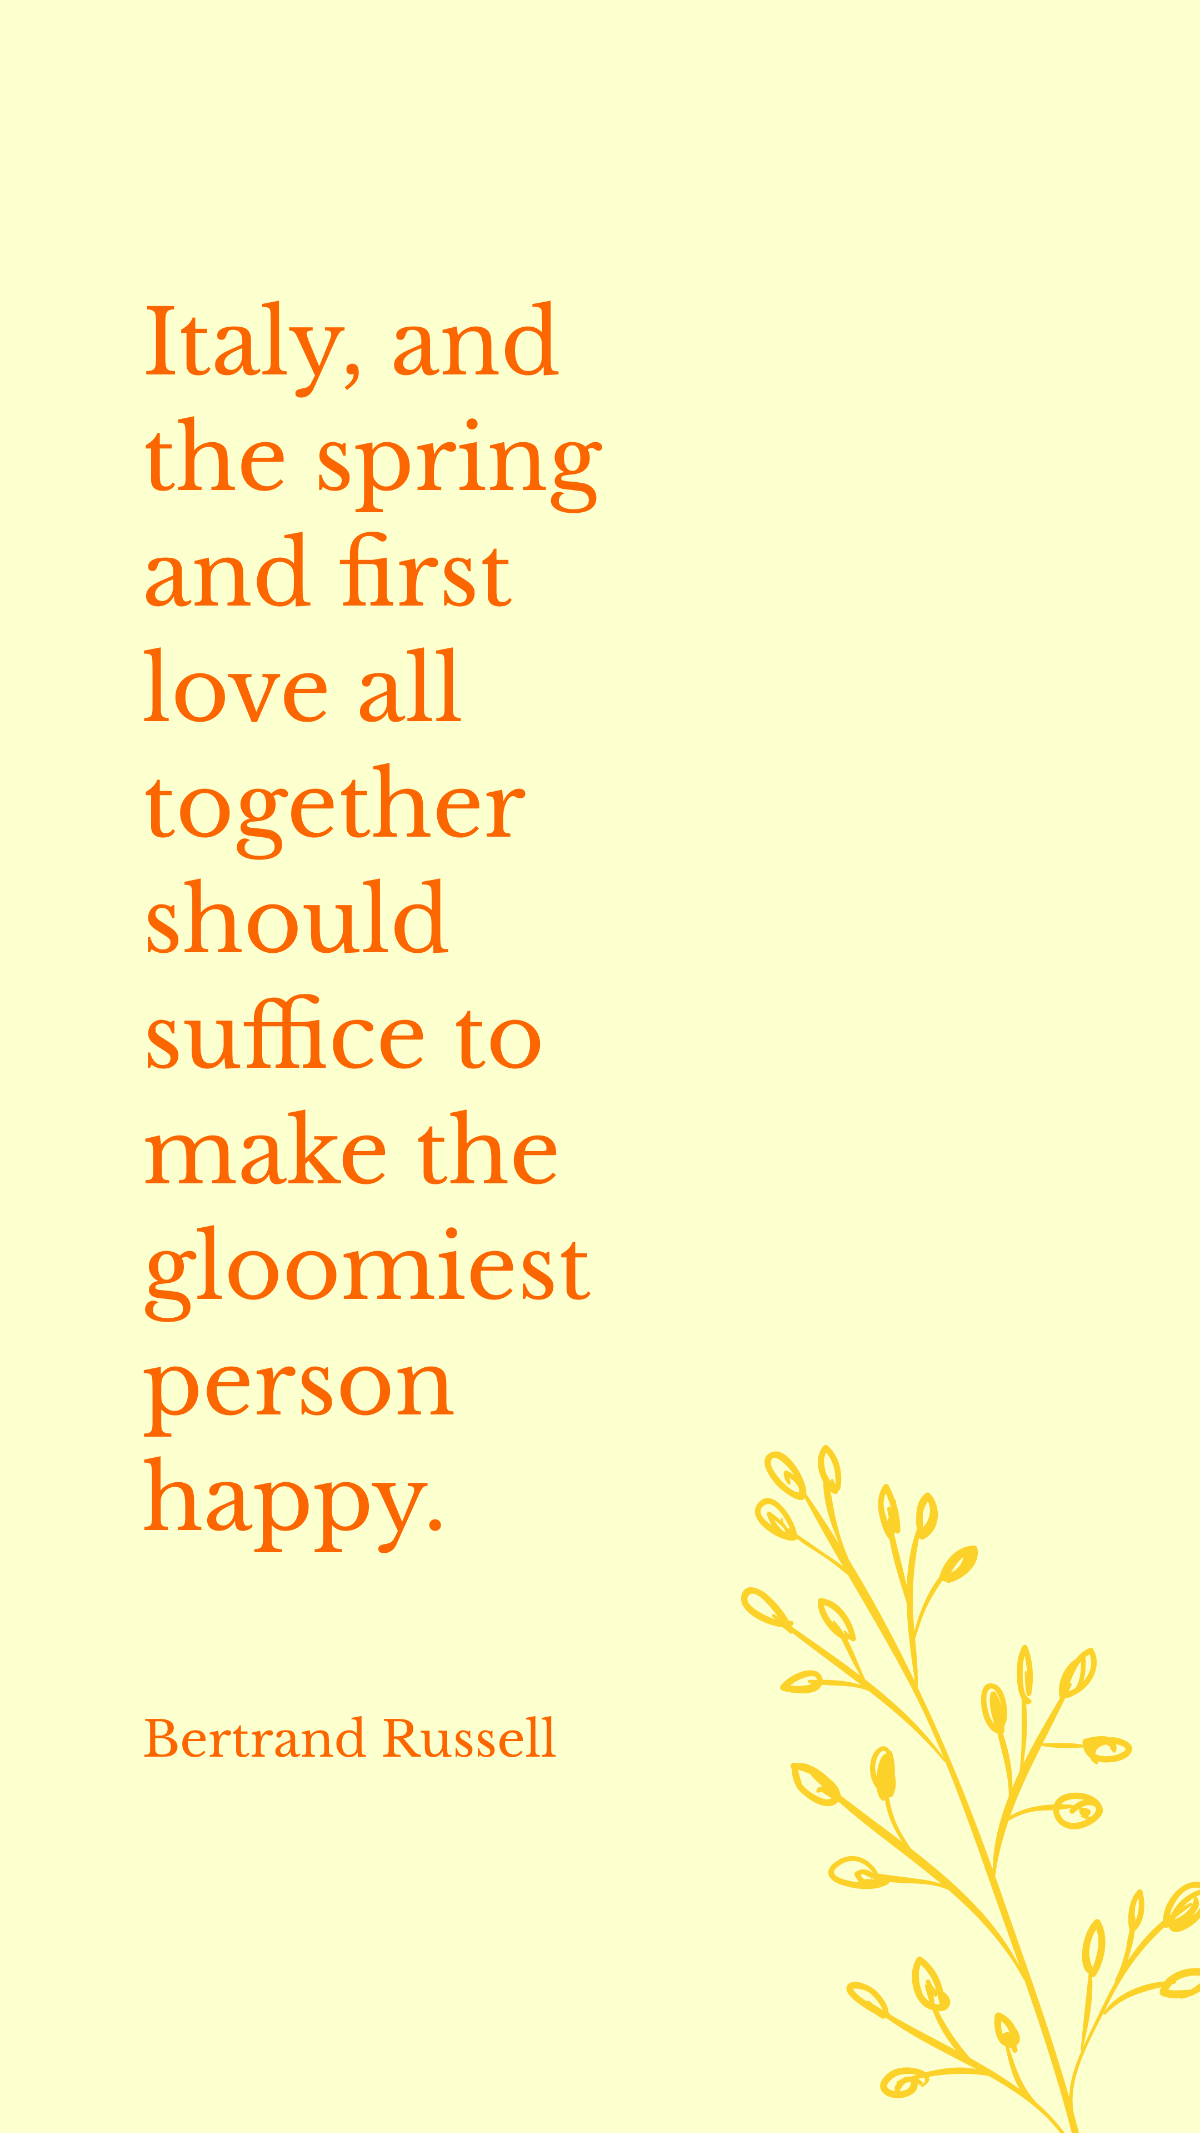 Bertrand Russell - Italy, and the spring and first love all together should suffice to make the gloomiest person happy.